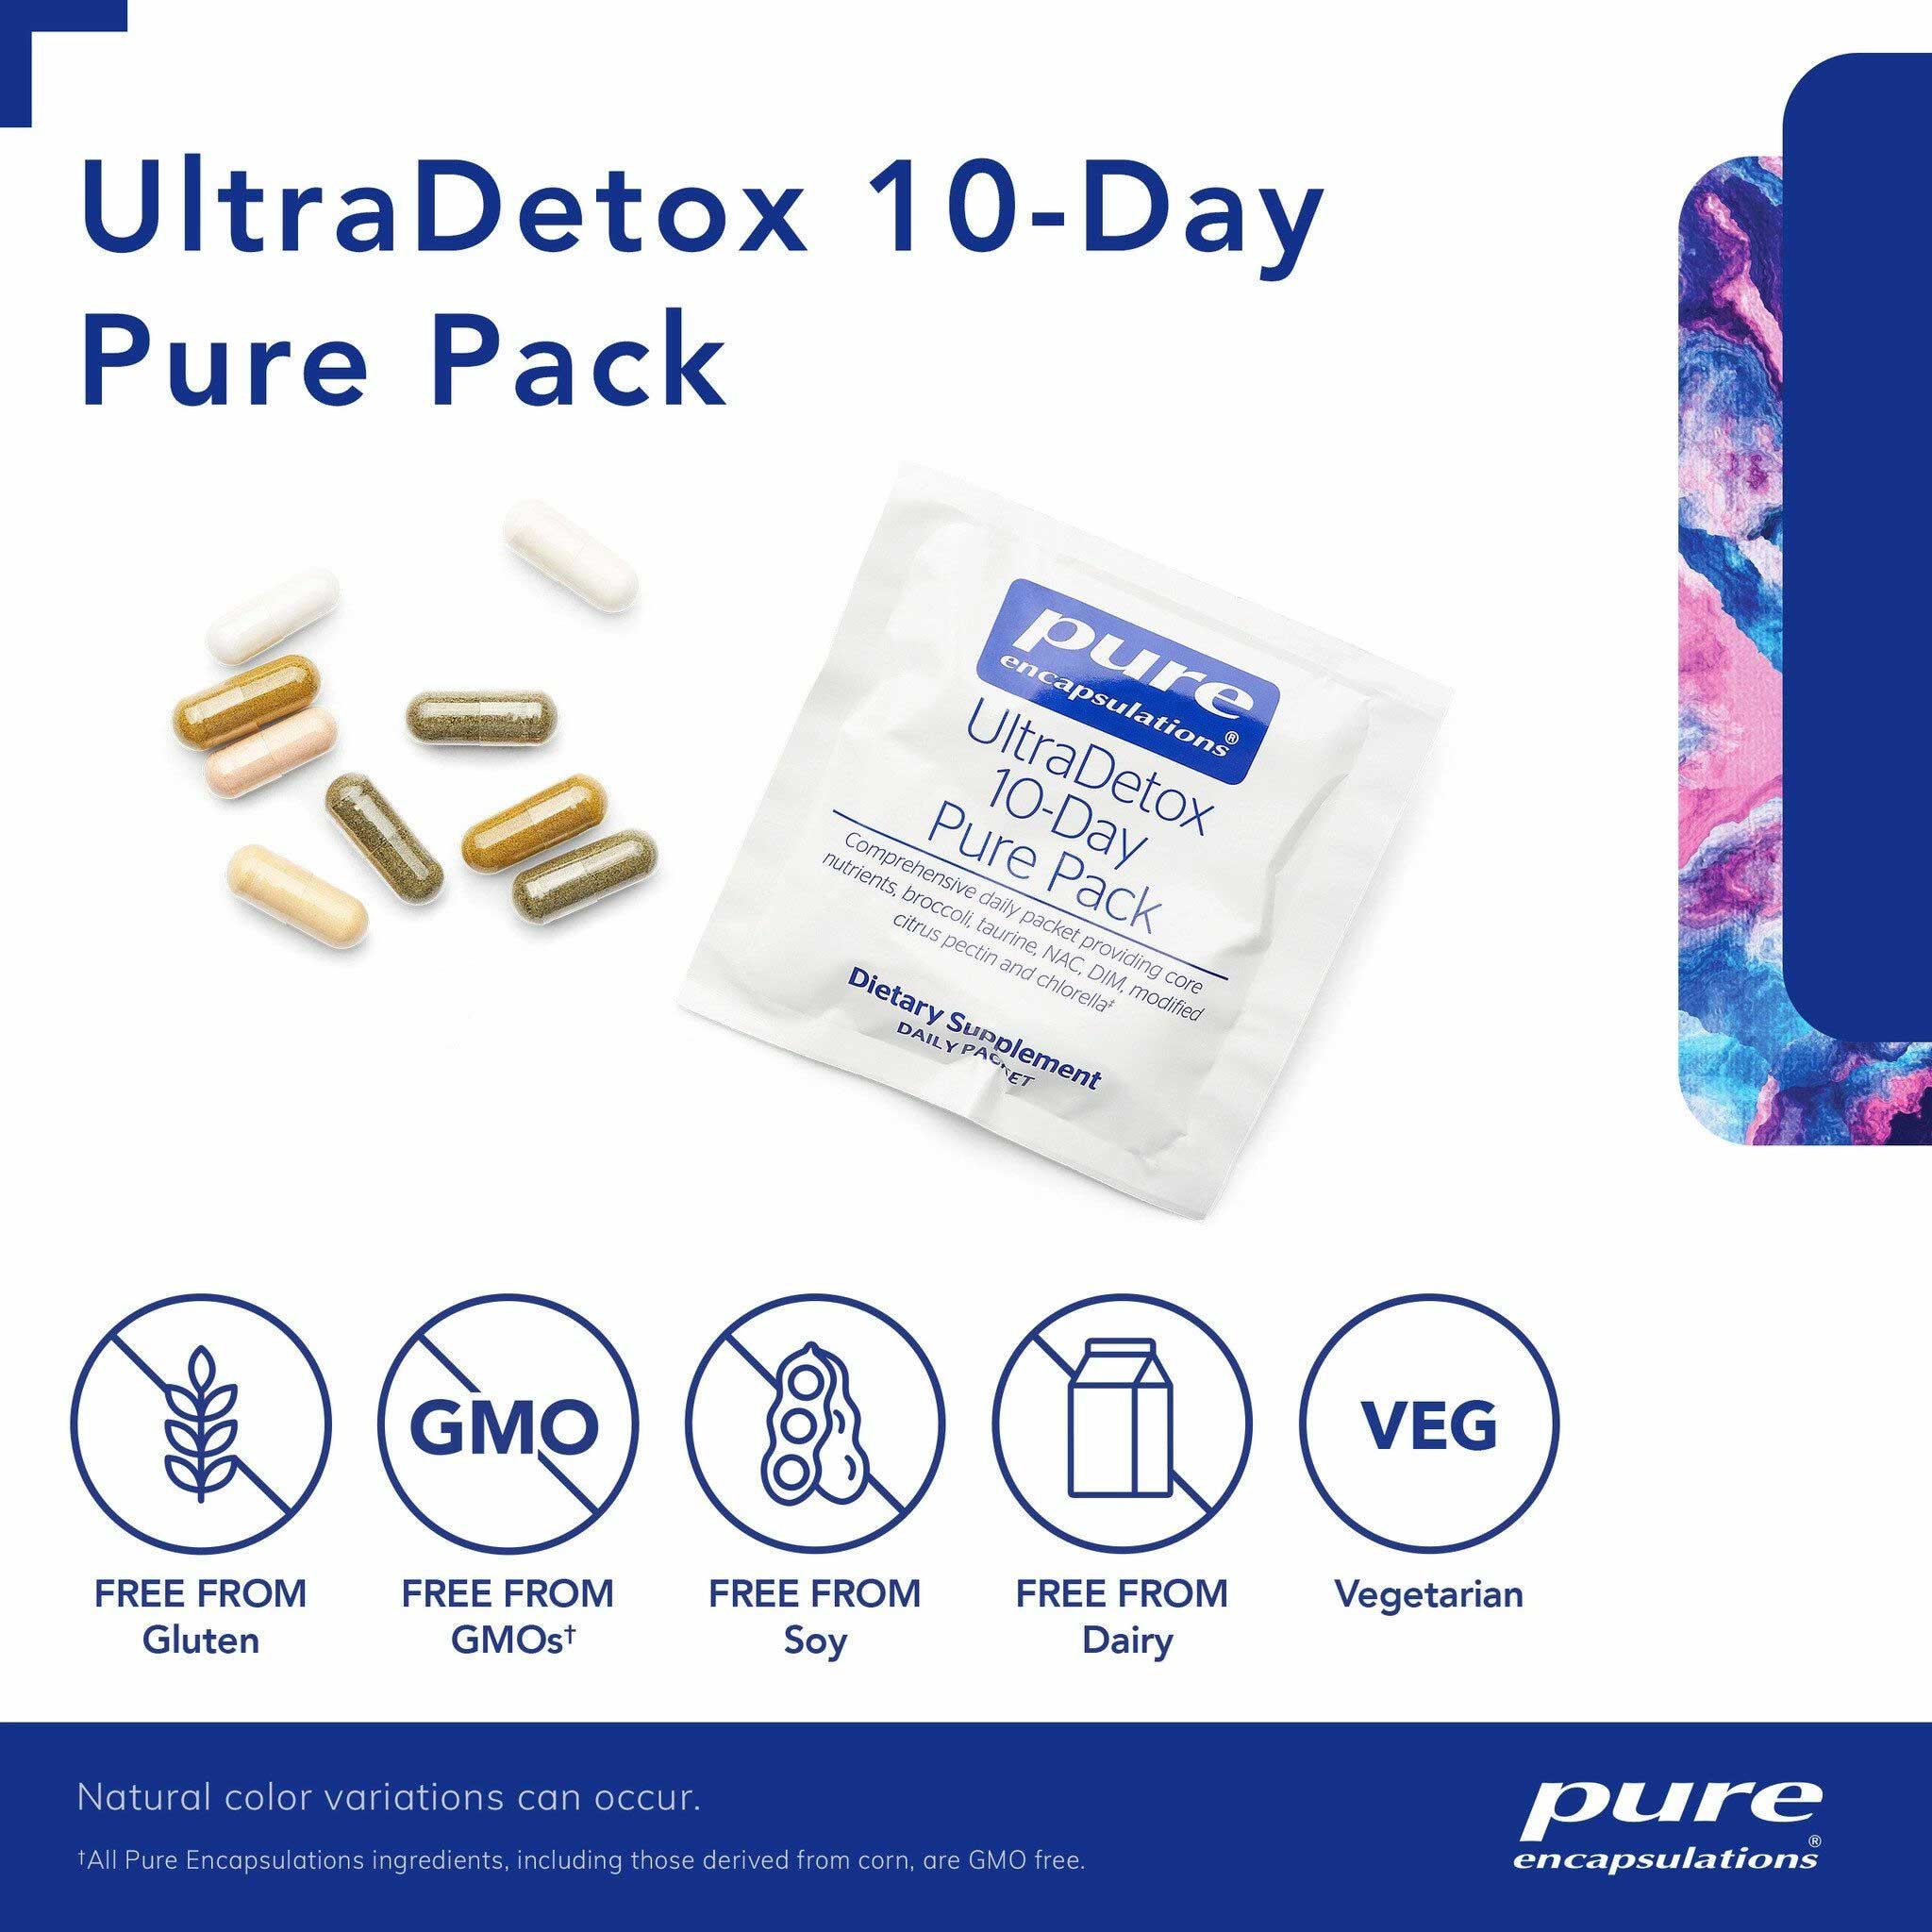 Pure Encapsulations UltraDetox 10-Day Pure Pack